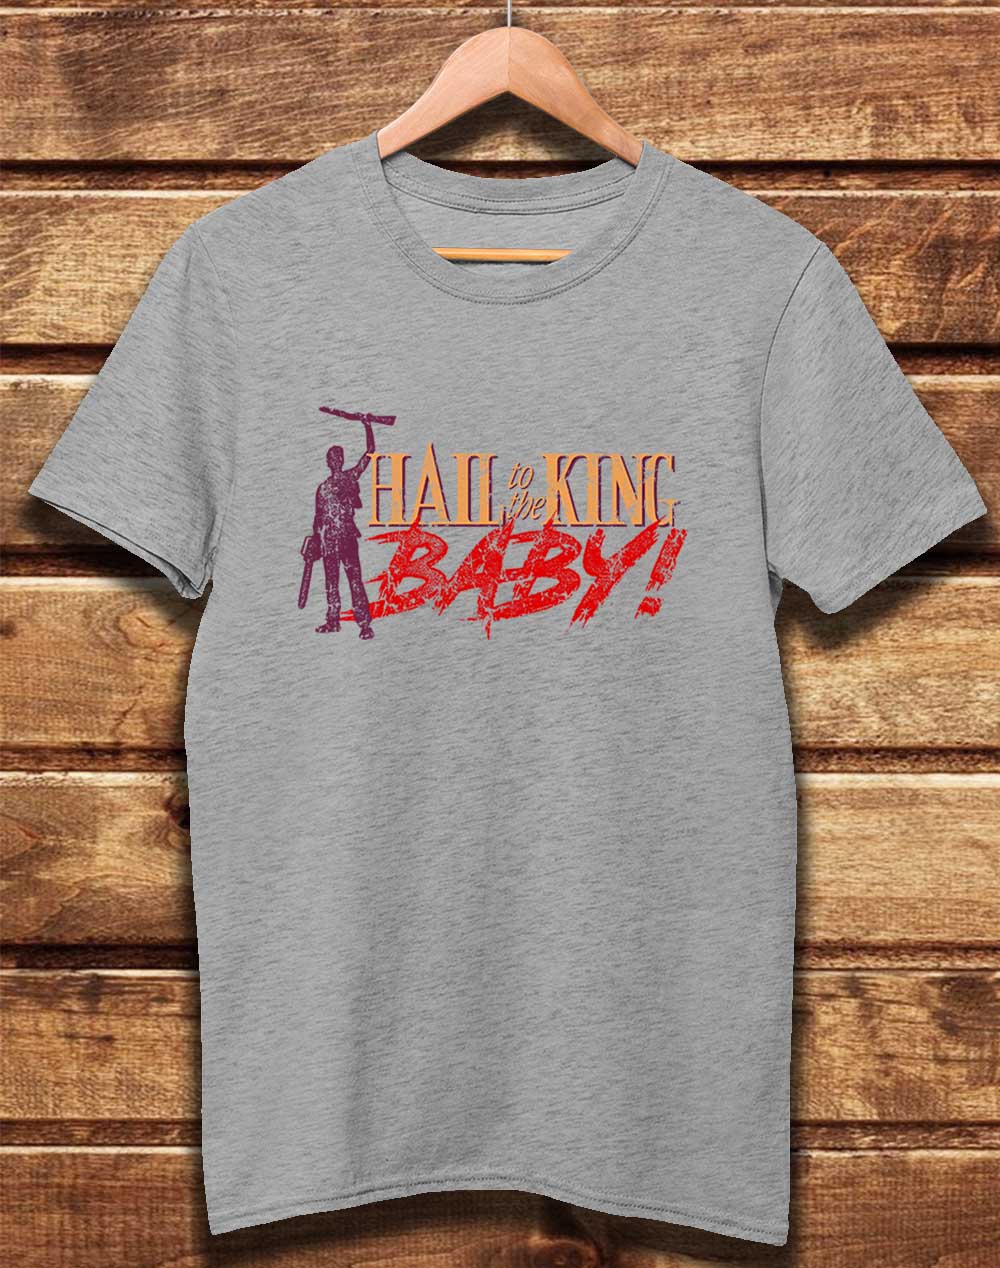 Melange Grey - DELUXE Hail to the King Baby Organic Cotton T-Shirt